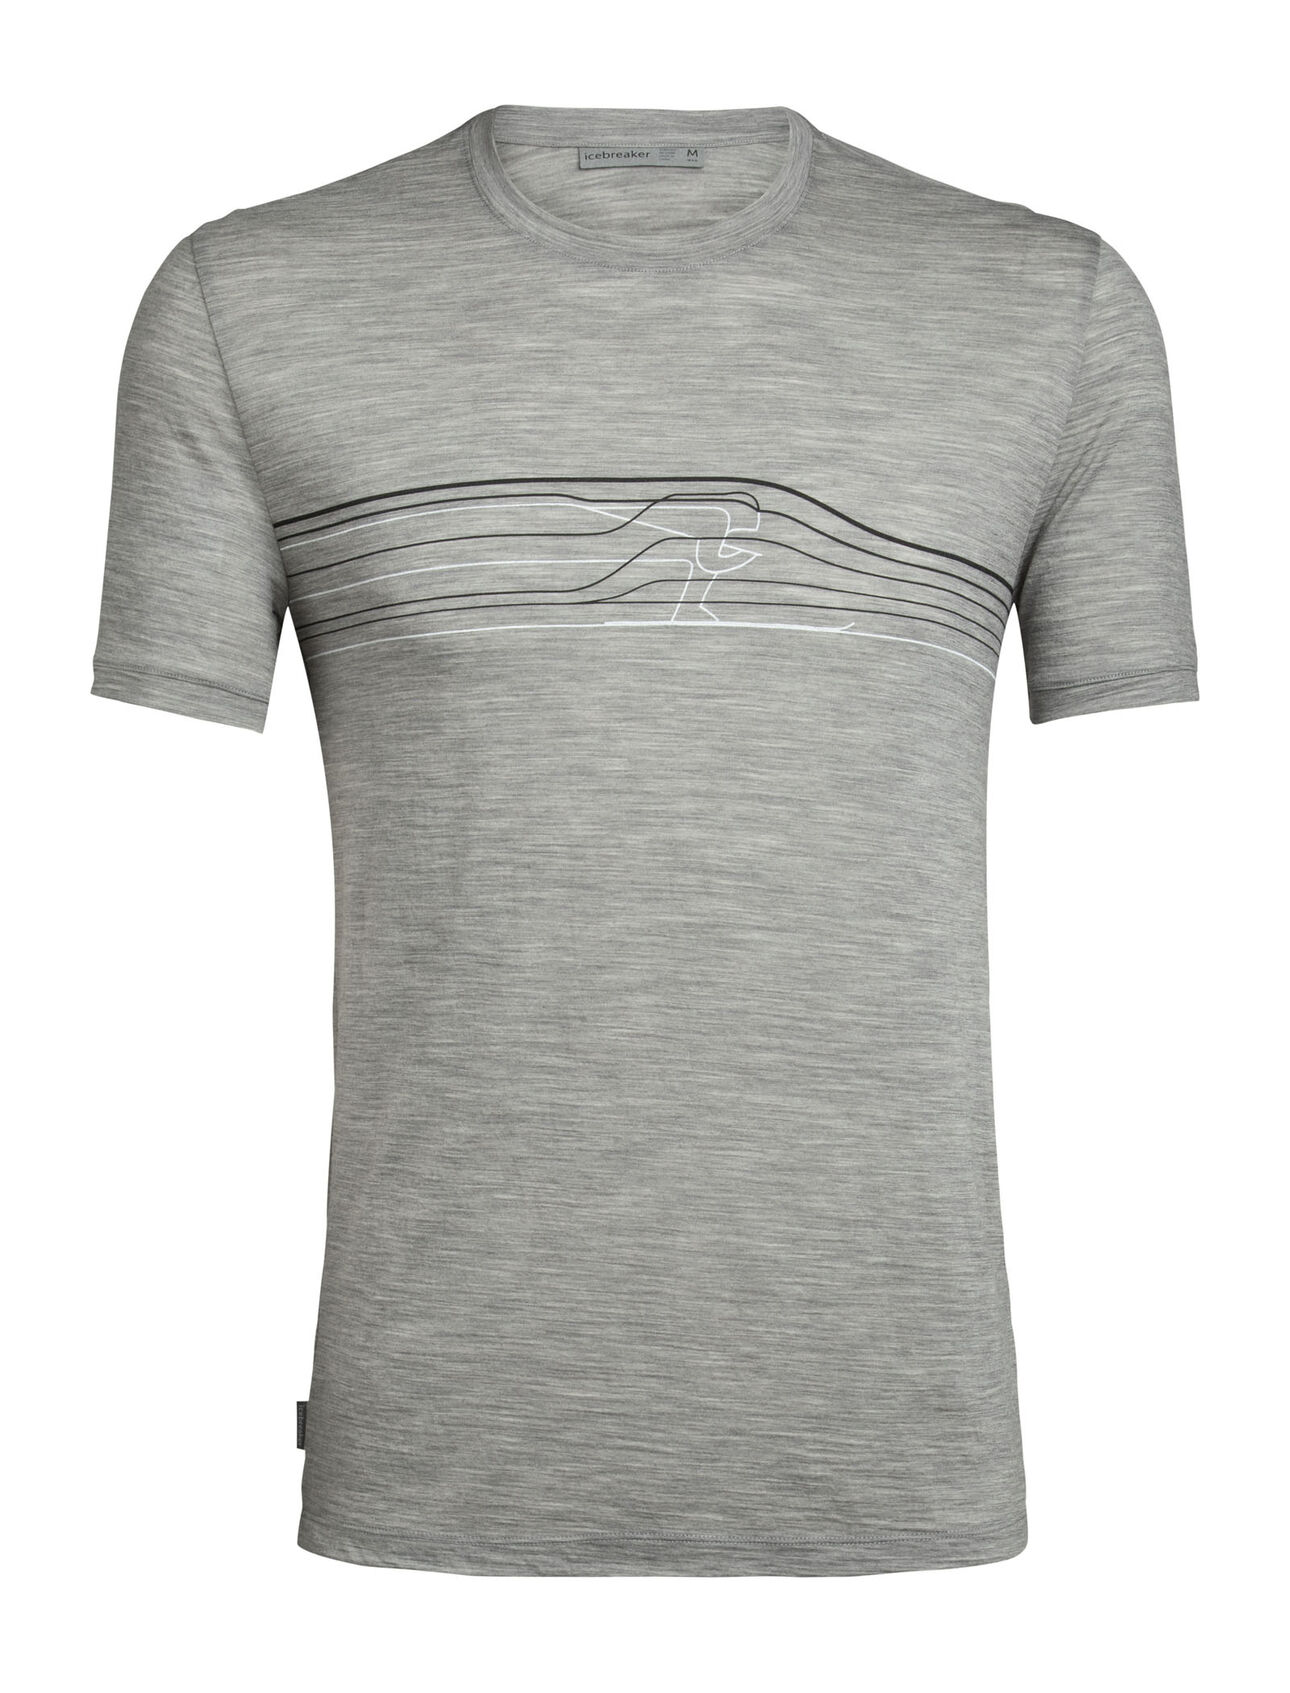 Mens Merino Spector Short Sleeve Crewe T-Shirt Ski Racer A lightweight, breathable, and versatile merino wool T-shirt ideal for everything from hiking to travel, our Spector Short Sleeve Crewe Ski Racer is a go-to for any and every day.